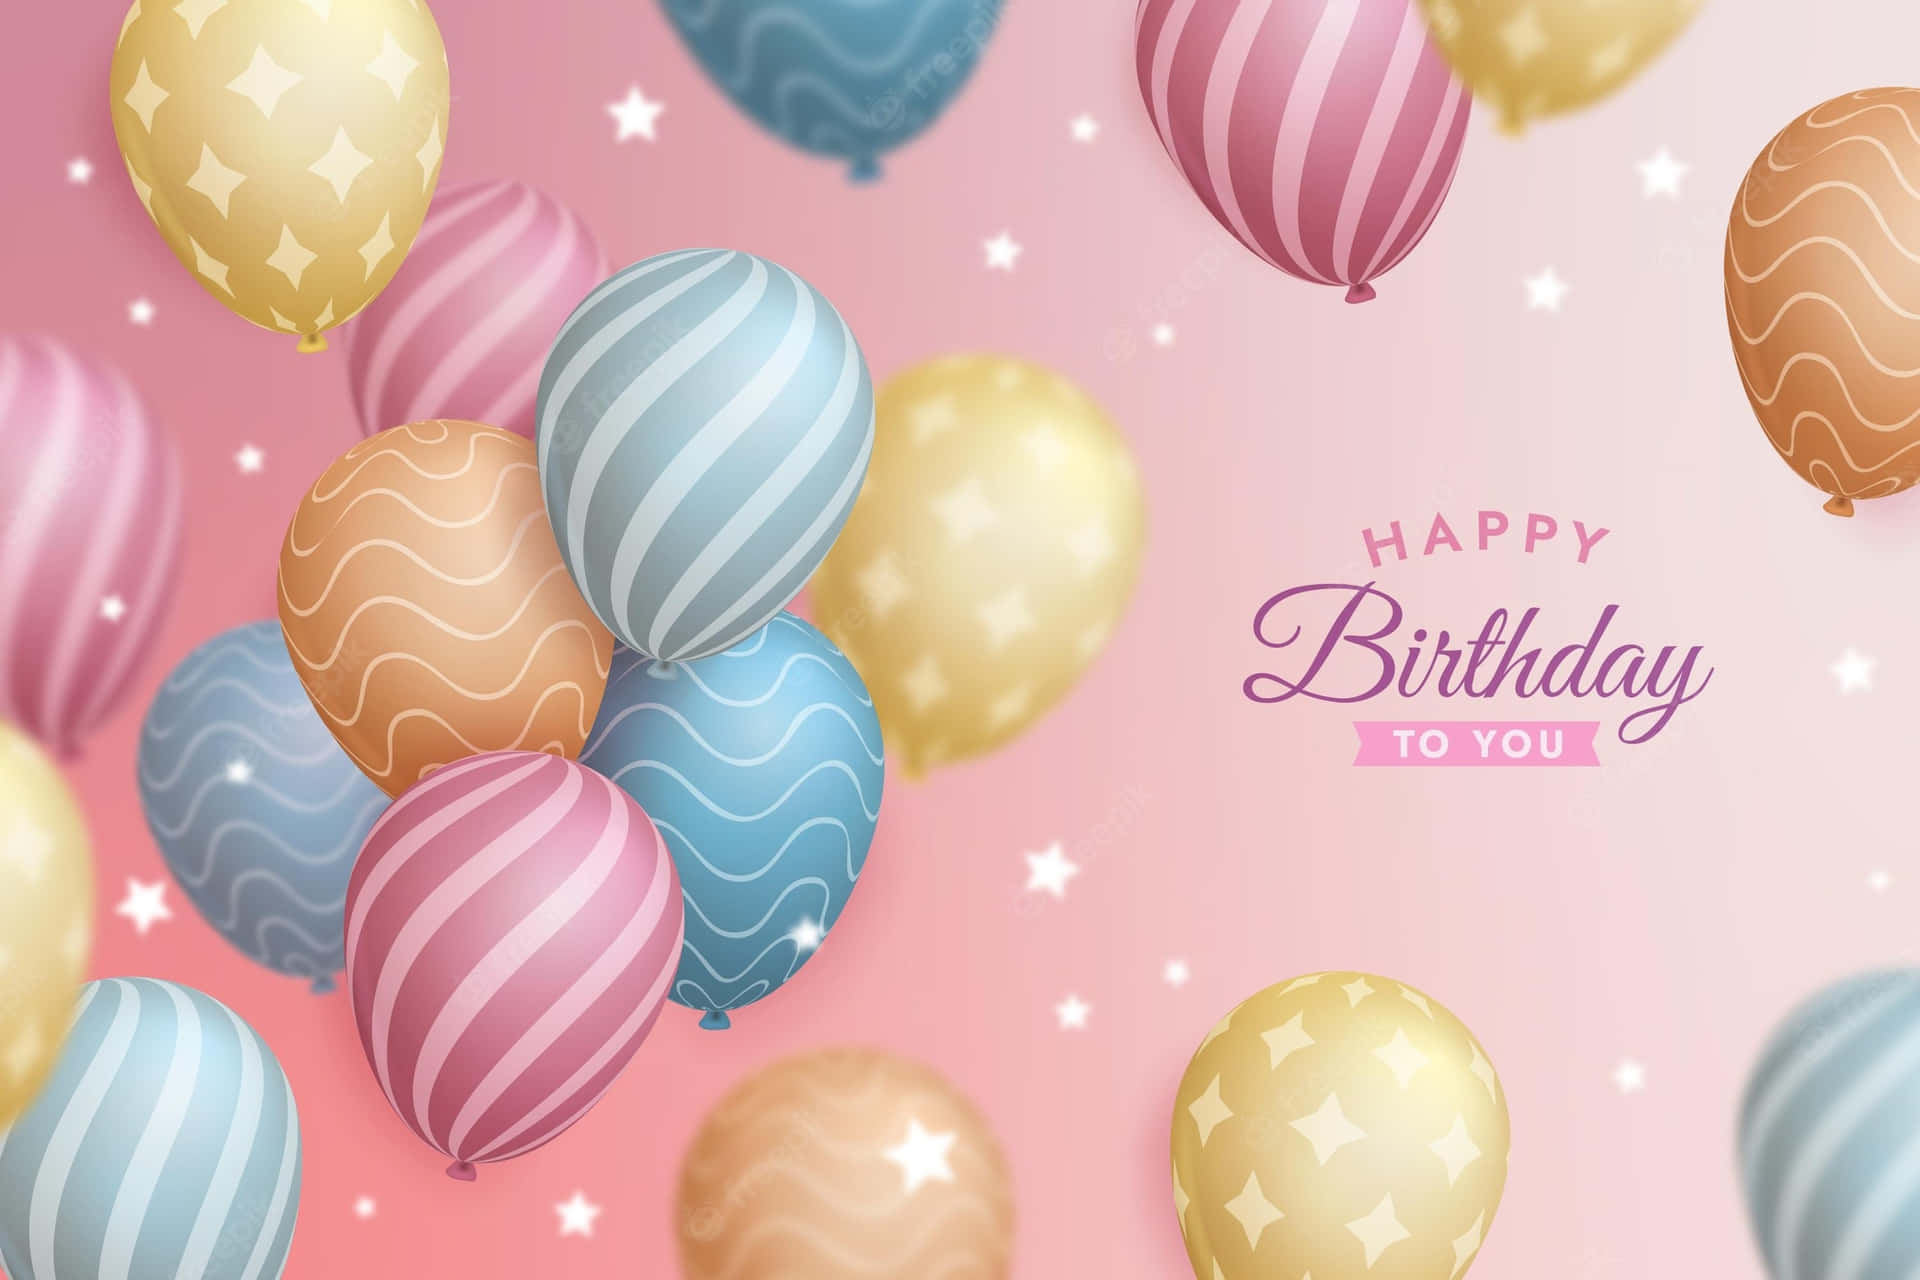 Image  Colorful Birthday Balloons in Pretty Shades of Pink Wallpaper